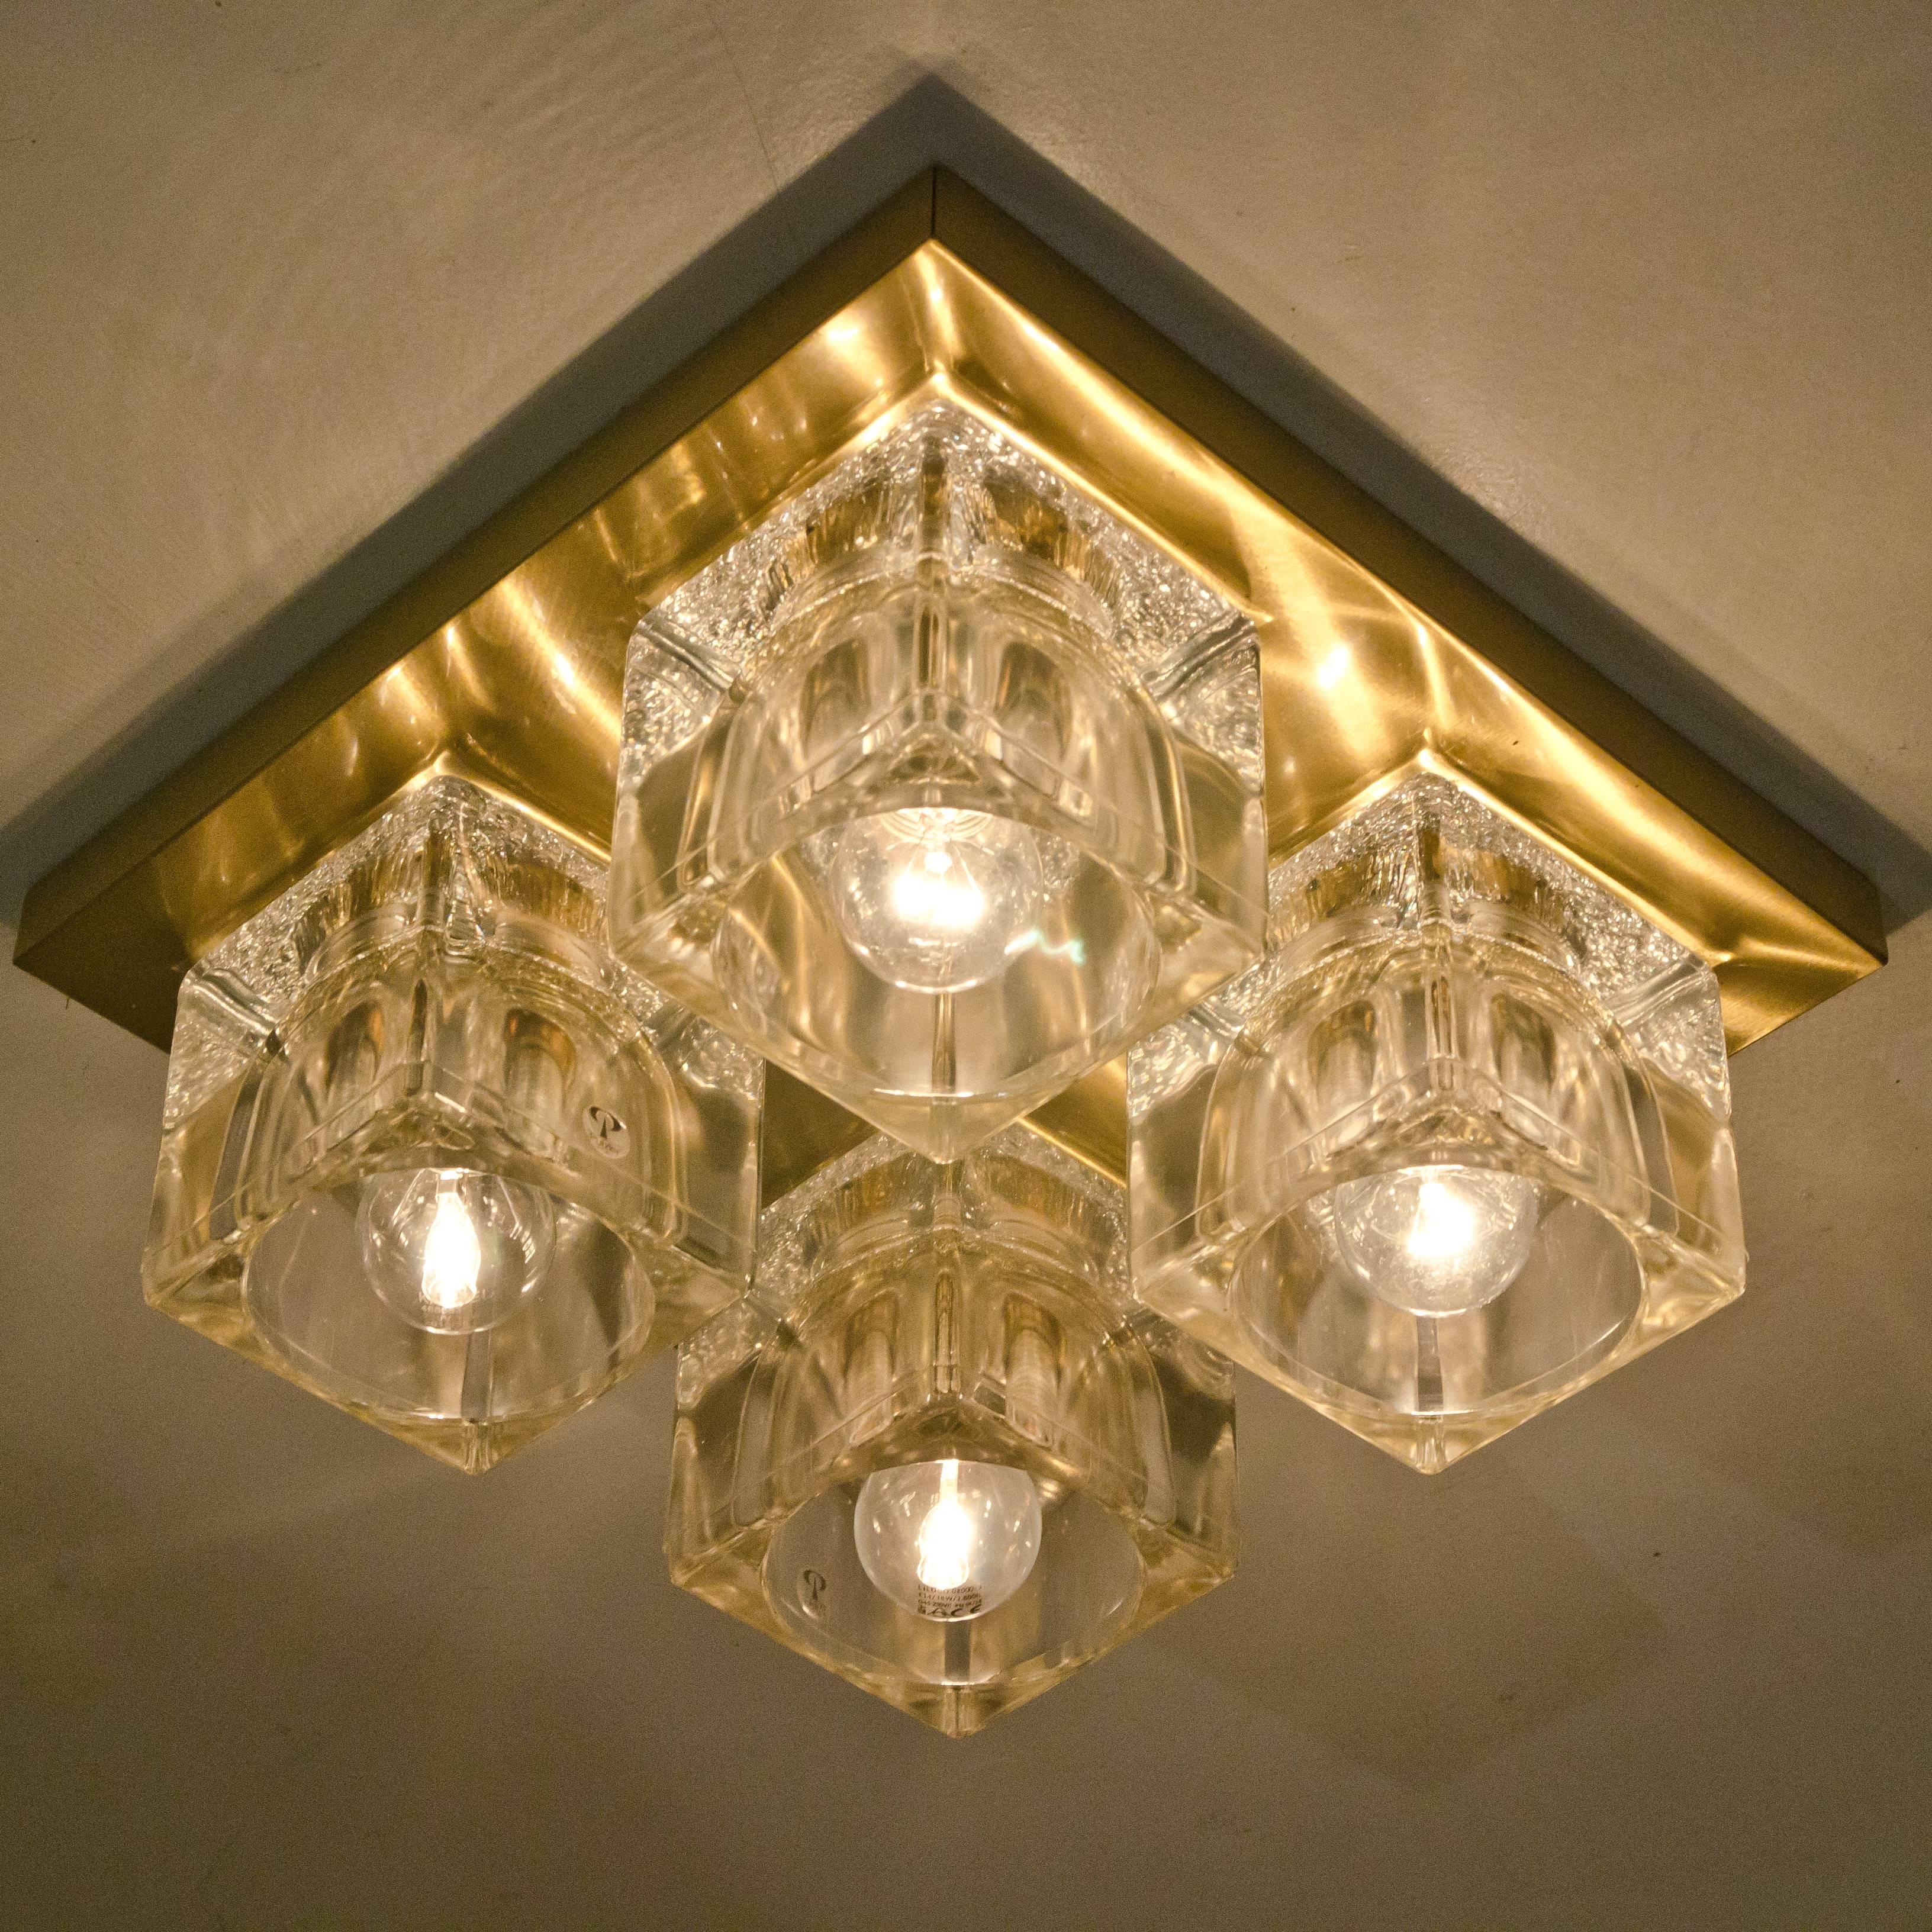 1 of the 4 high-end Peill & Putzler wall/ceiling light fixtures, brass and glass, Germany, 1970. Each sculptural vintage wall light consists of four clear glass cubes on a square brass frame which beautifully reflects the light with a warm